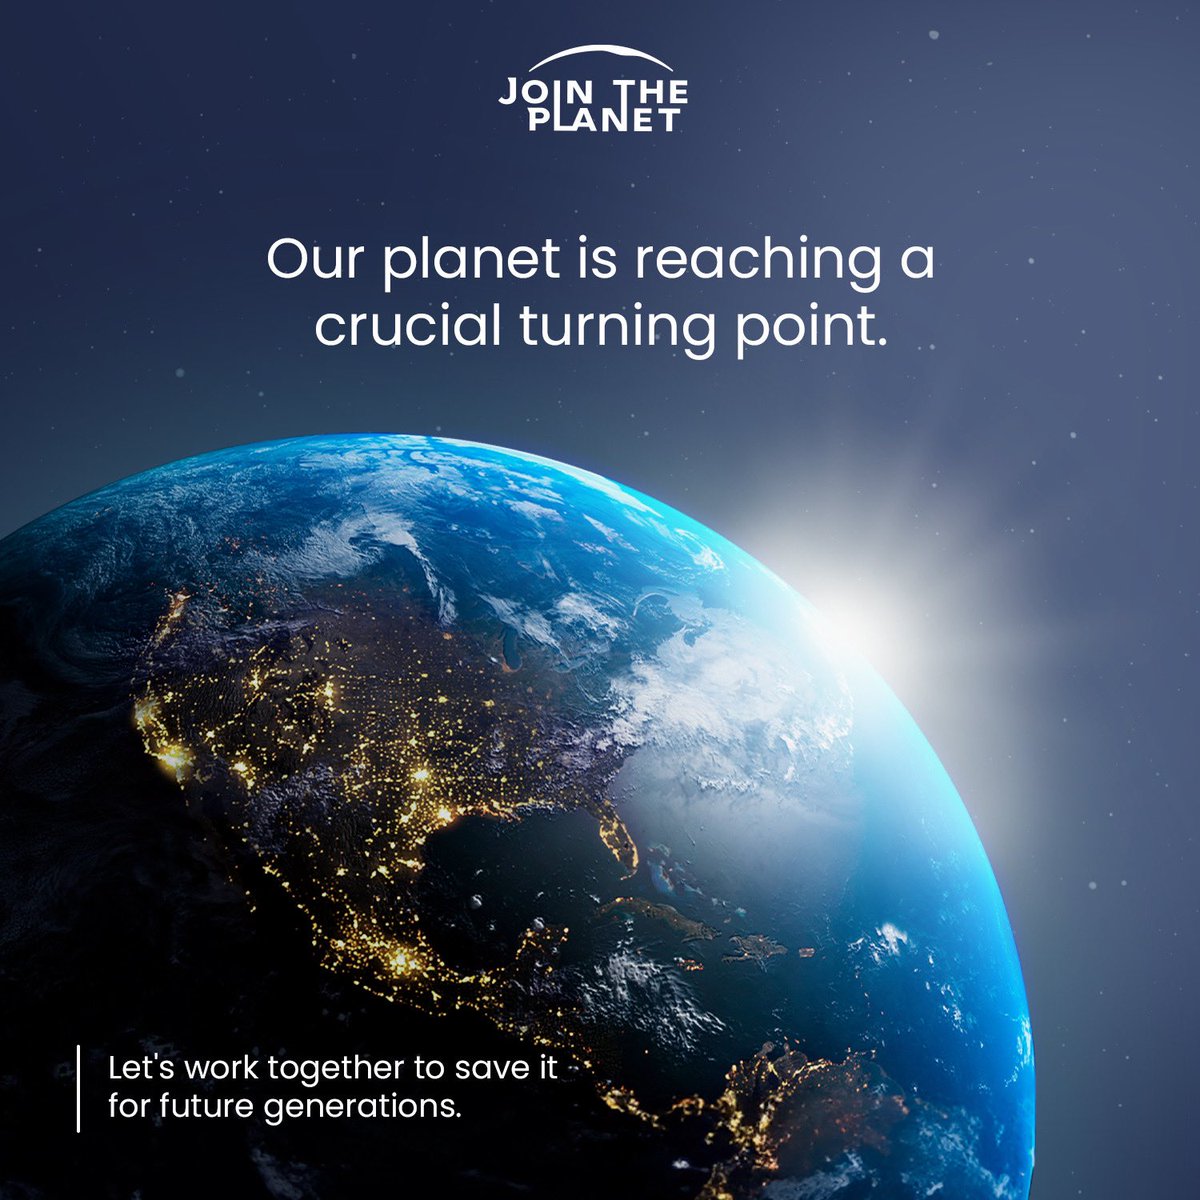 We hold the conviction that addressing climate change the protection, restoration, and responsible management of our natural environment.

#JoinThePlanet #SustainabilityNow #ChangeMakers #SocialResponsibility